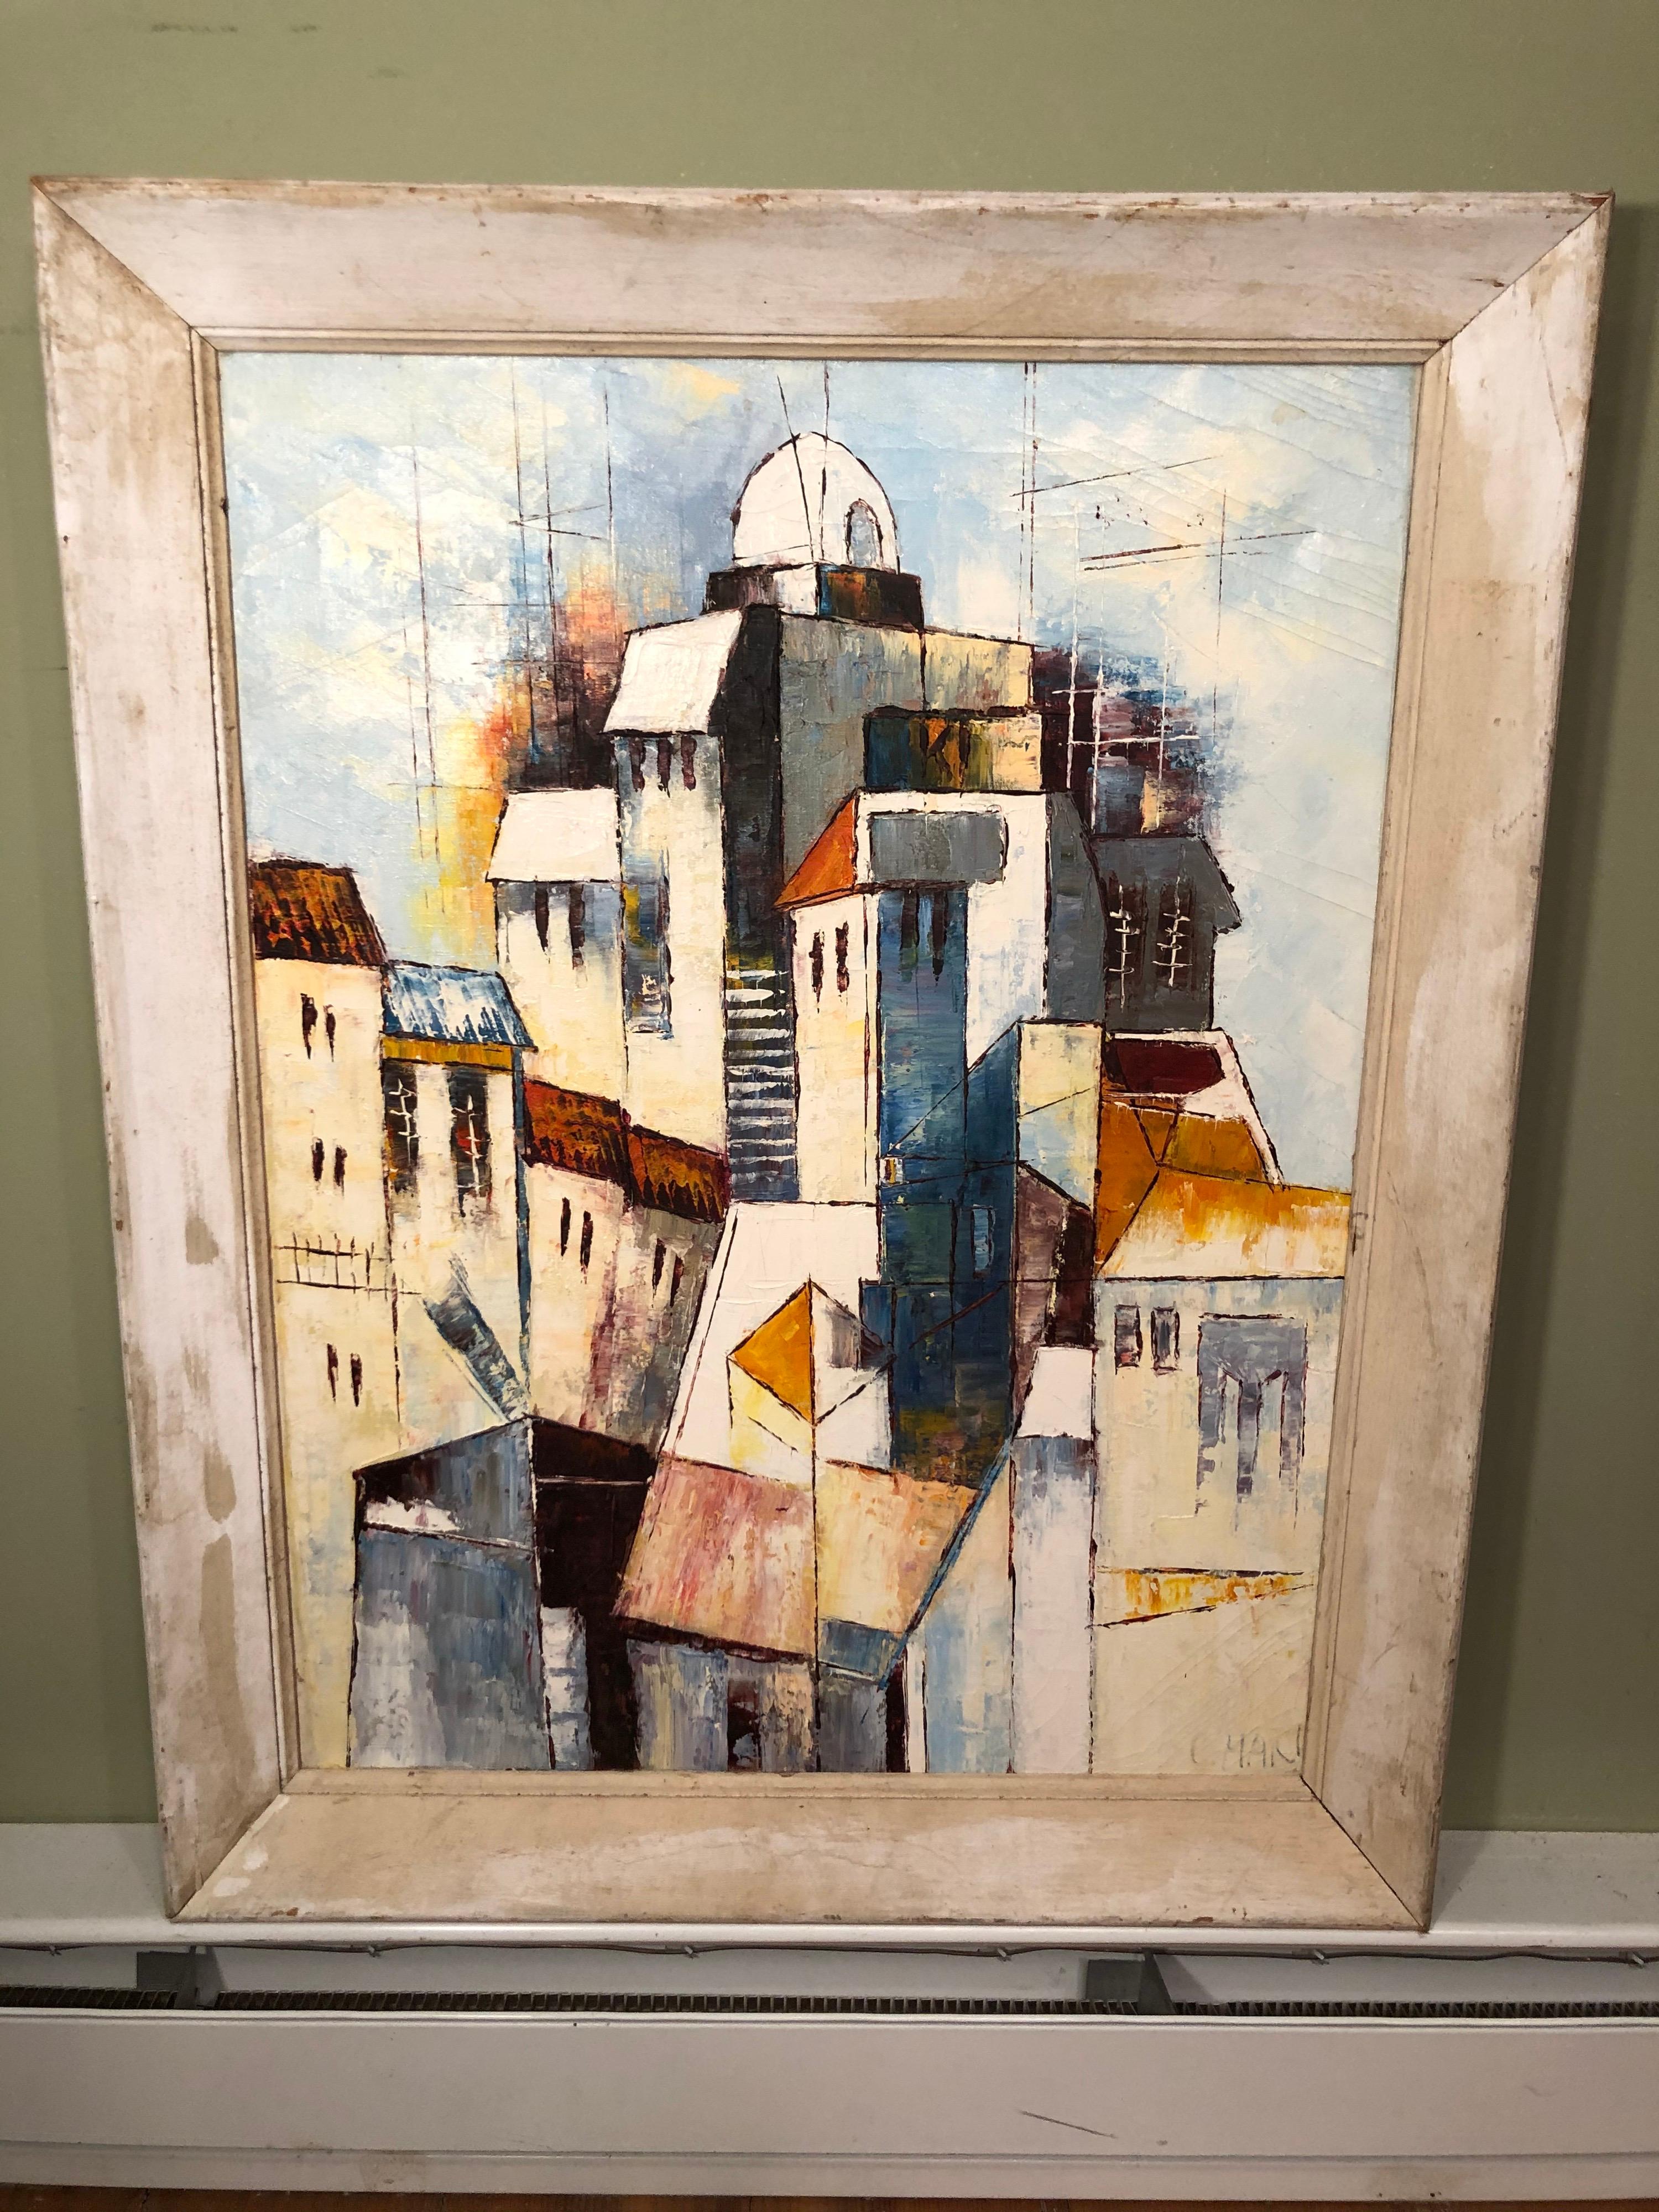 Mid-Century Modernist painting of a Greek village. Reminiscent of Greece or Eastern Europe. Nice modernist or cubist feel. Signed illegibly C. Man.